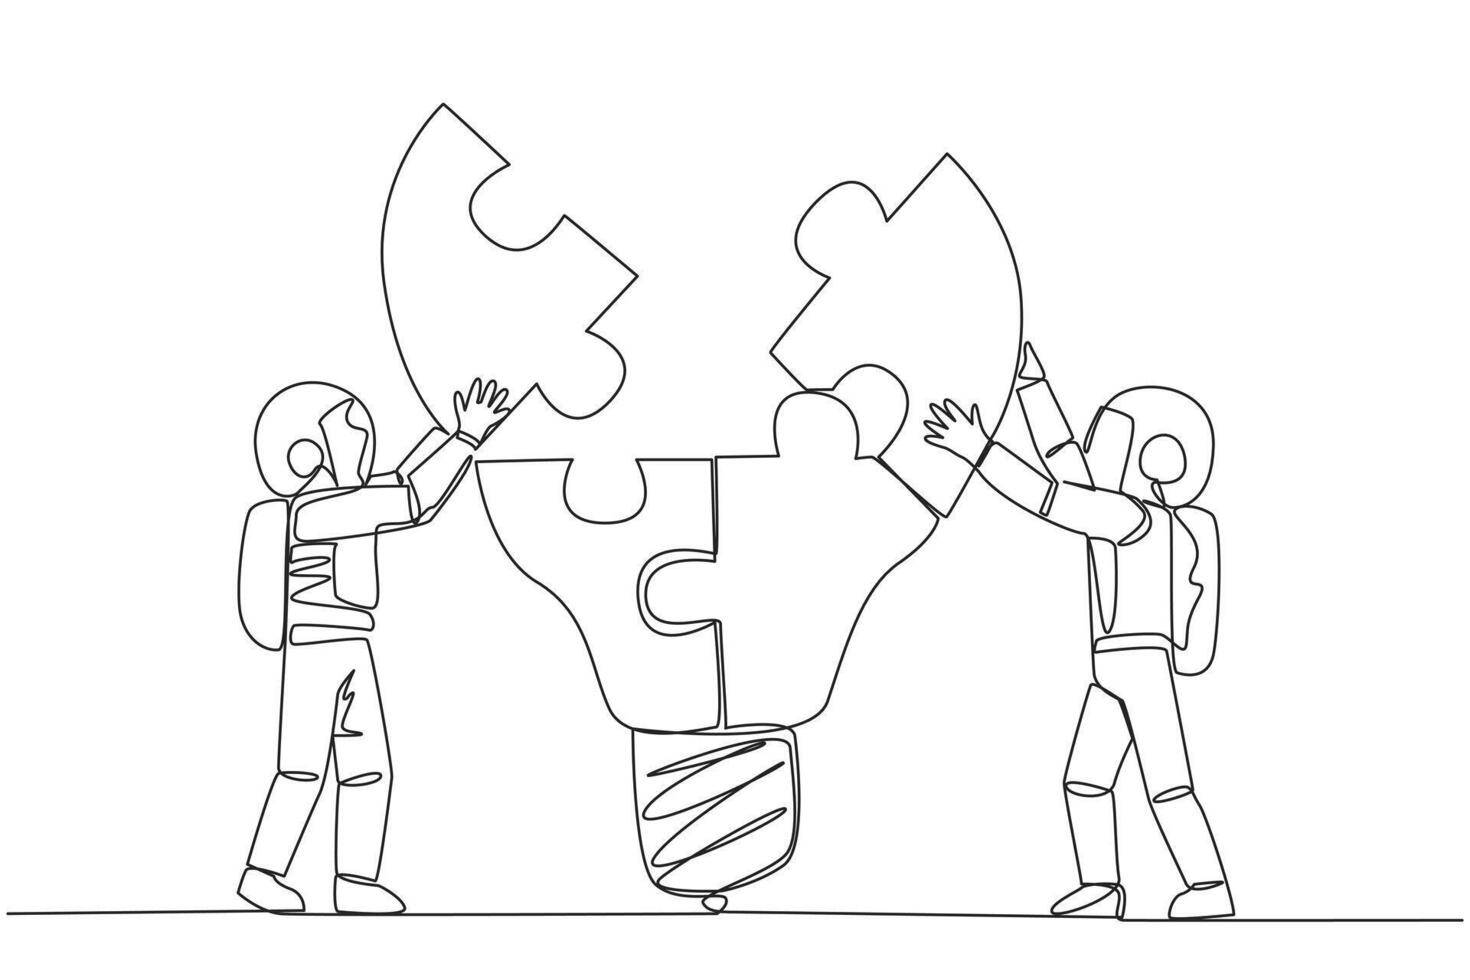 Single one line drawing two astronauts work in teams to complete a lightbulb-top puzzle. Working together to produce brilliant ideas. Teamwork on space. Continuous line design graphic illustration vector